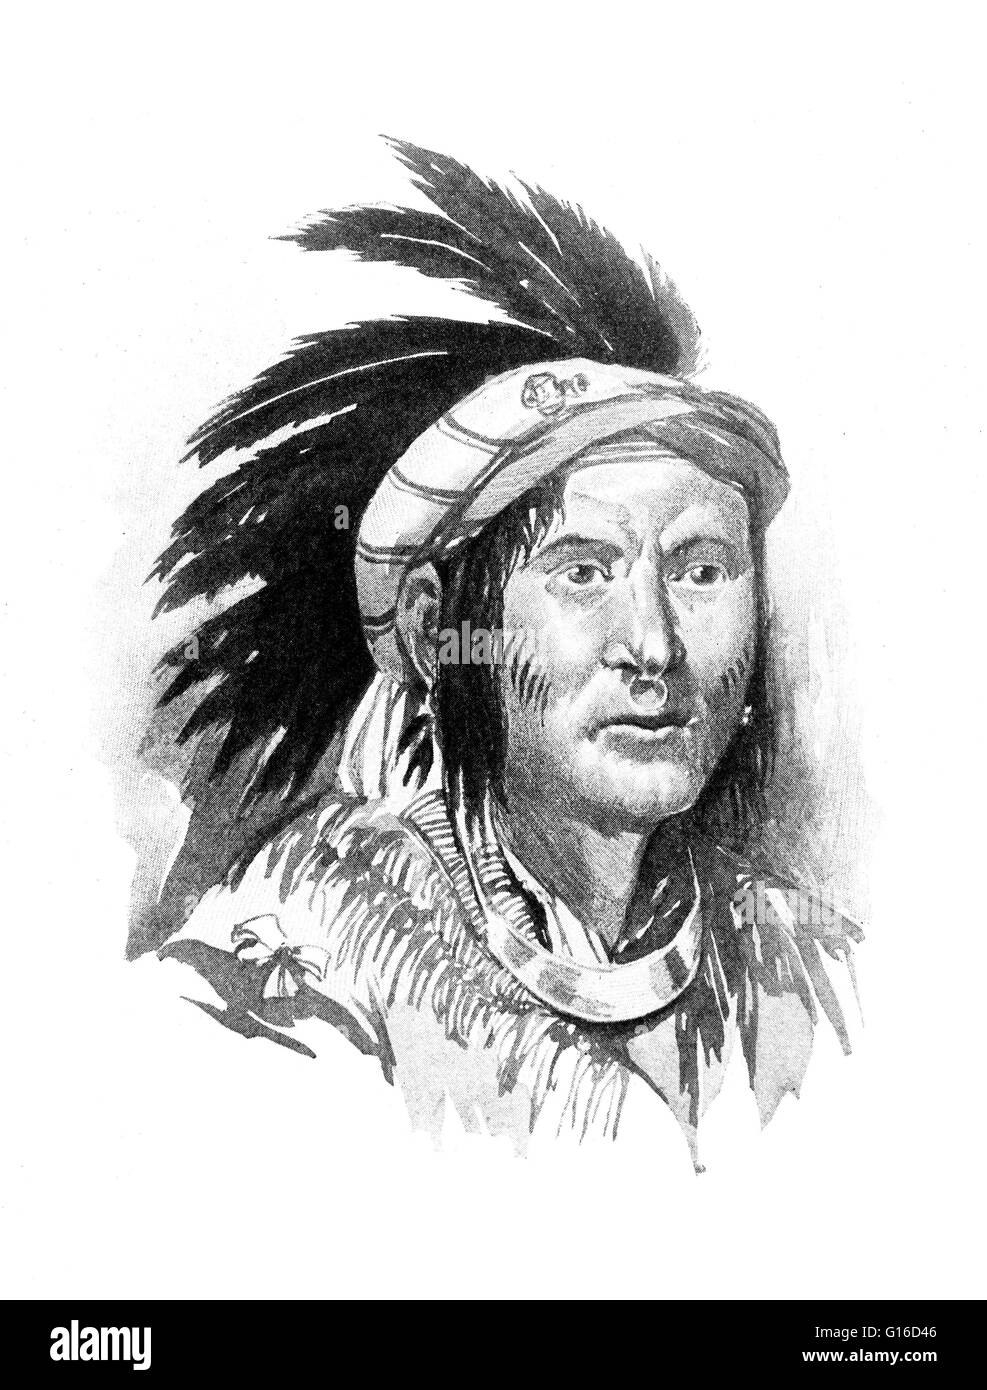 Pontiac (1720 - April 20, 1769) was an Ottawa war chief who became famous for his role in Pontiac's Rebellion (1763-1766). After the French and Indian War, Native American allies of the